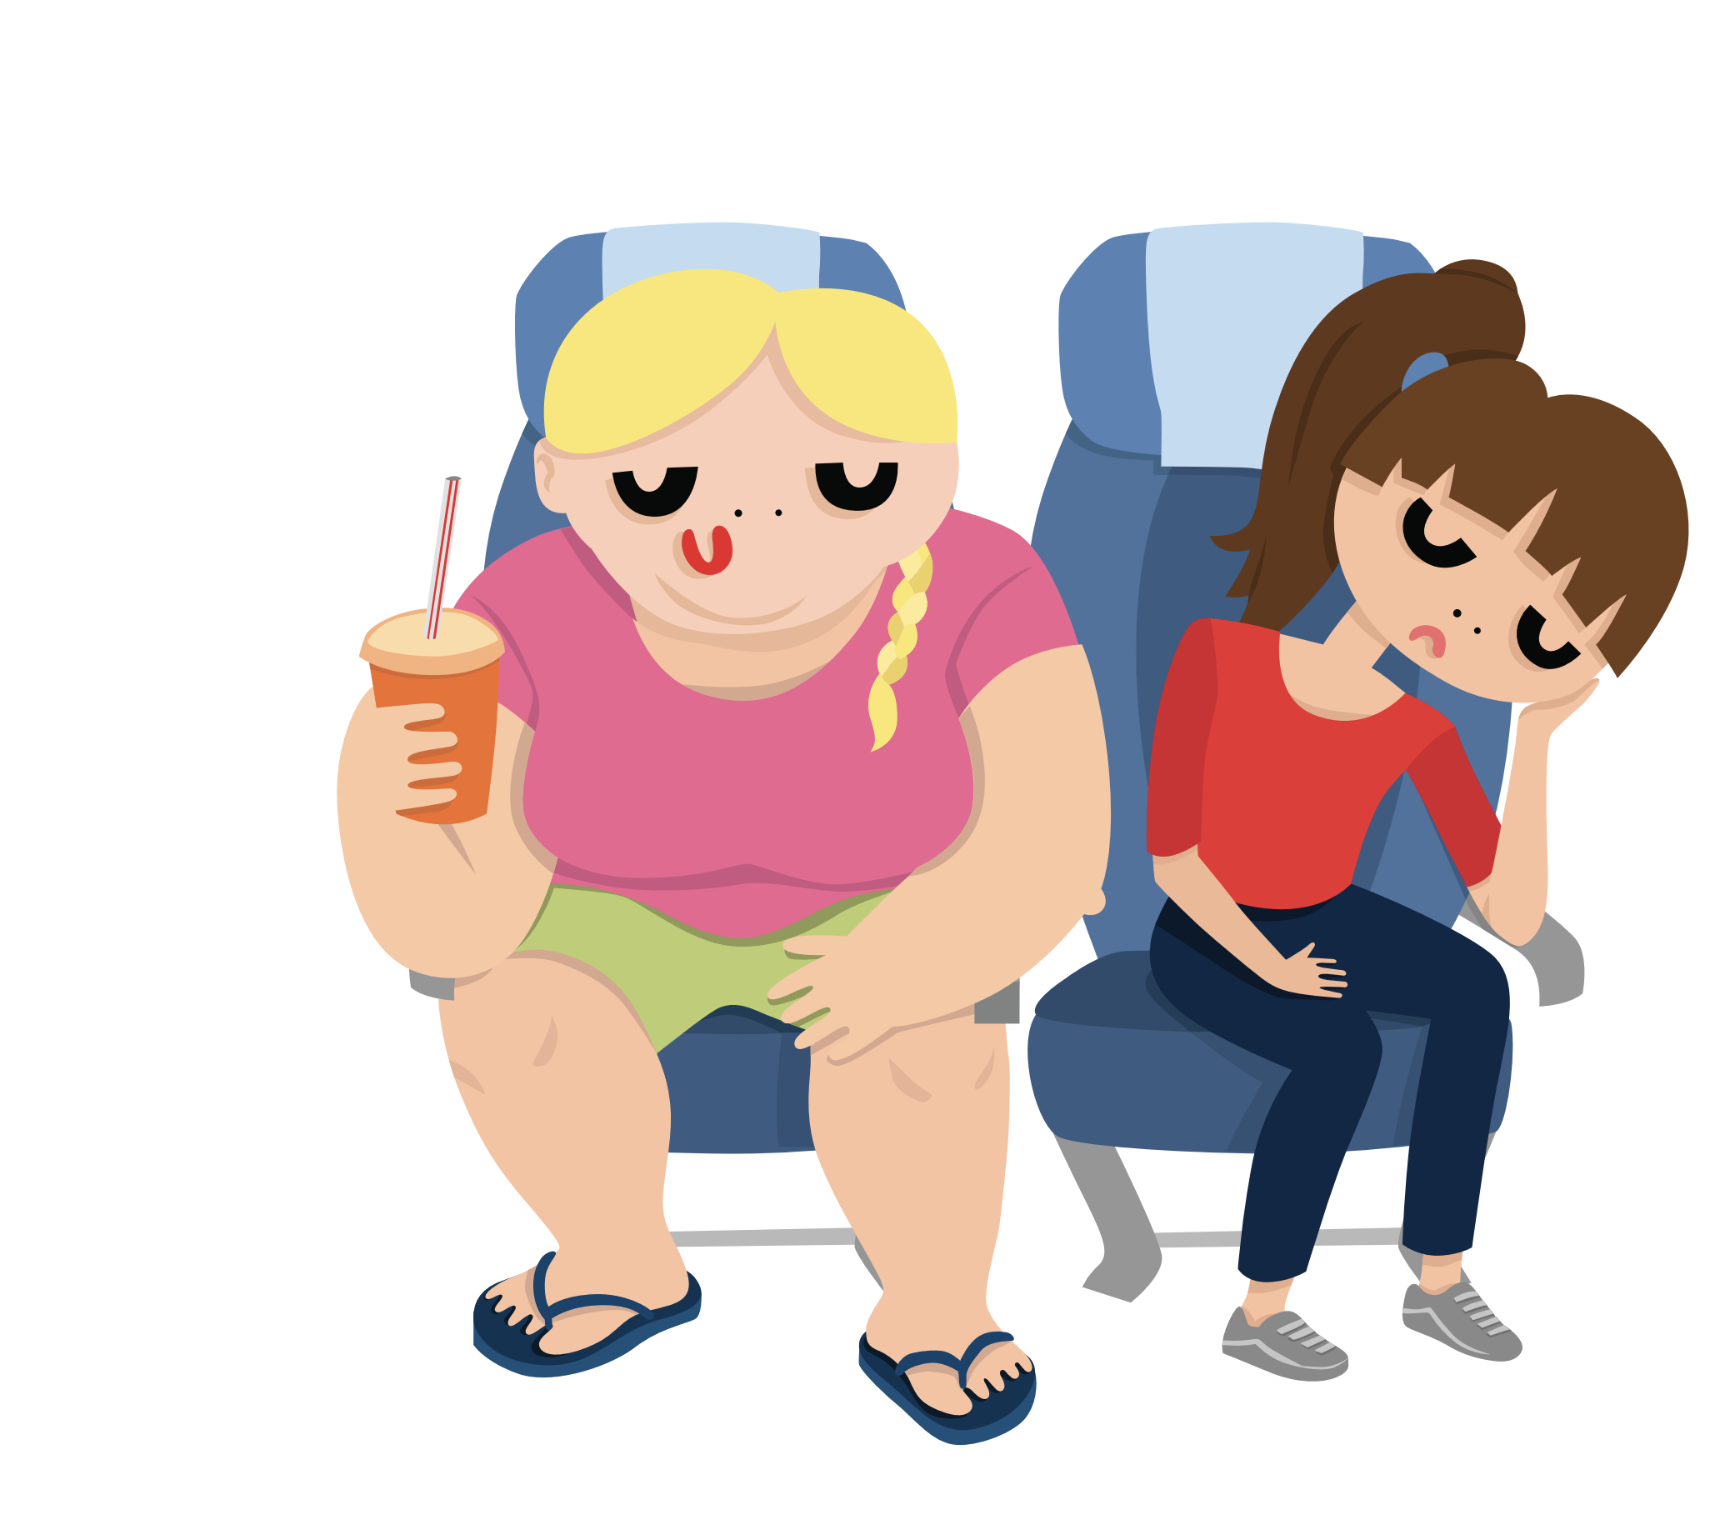 Cartoon illustration of a large woman next to another average sized woman on a plane